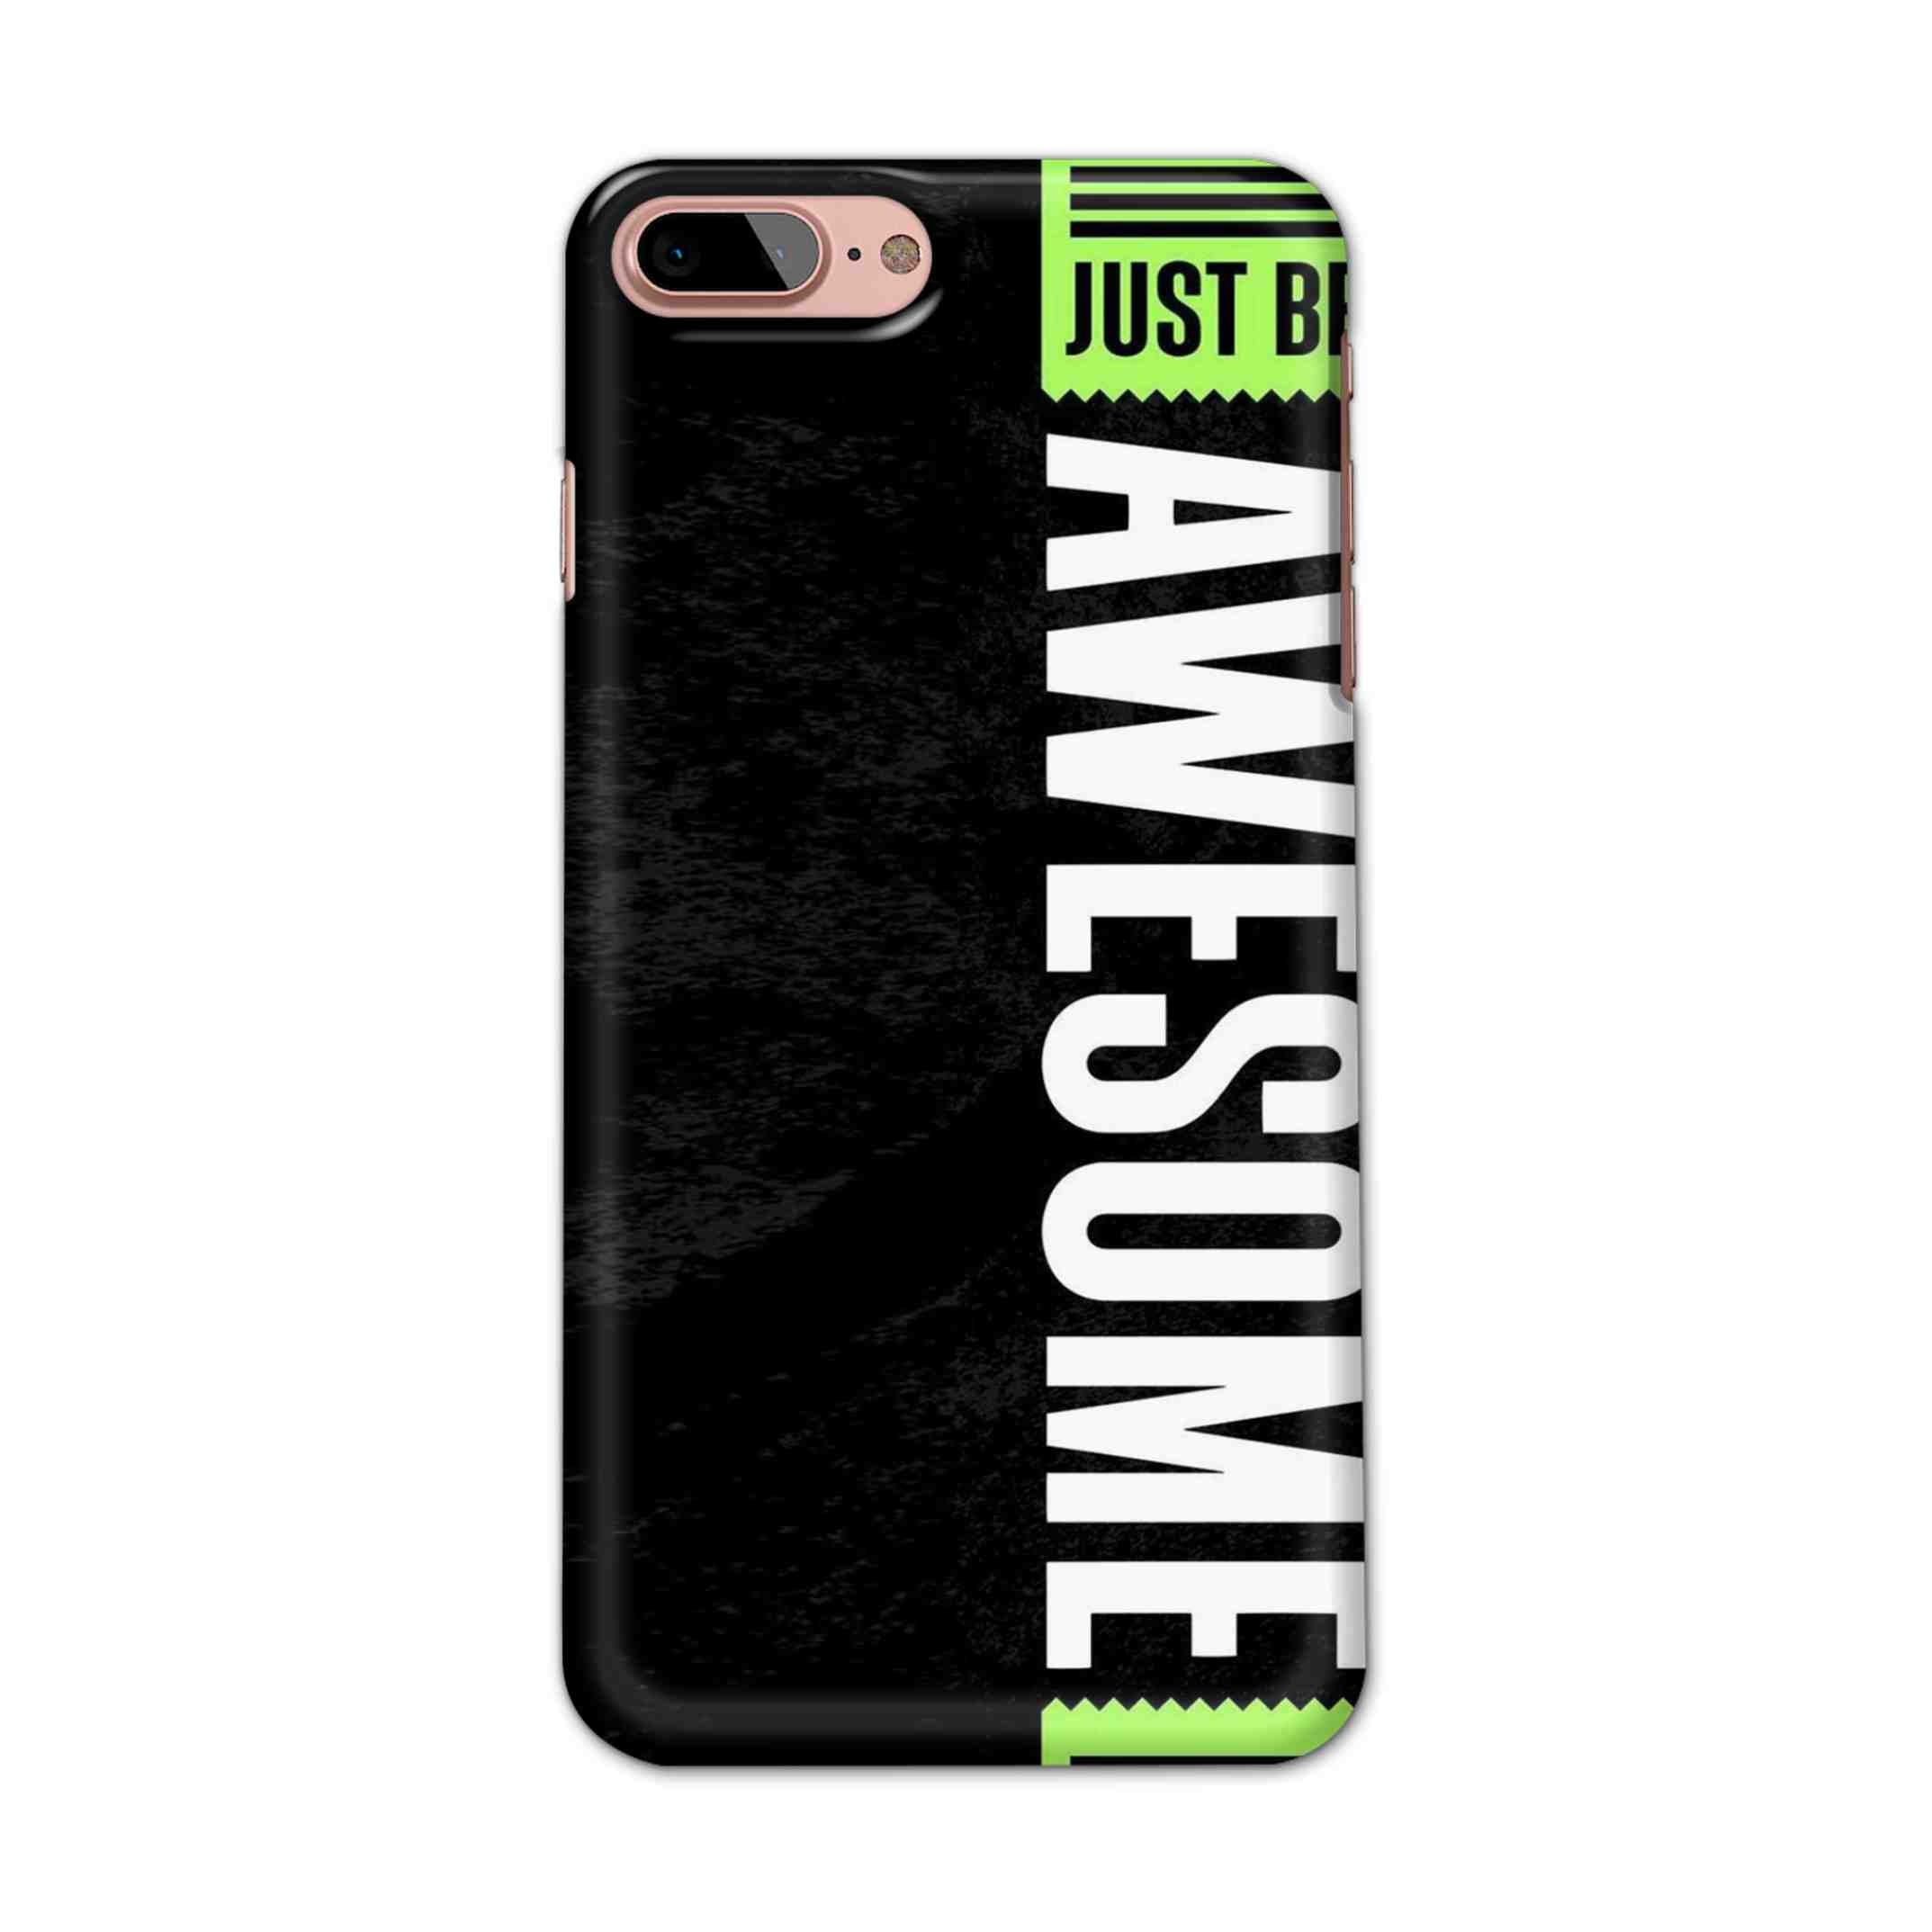 Buy Awesome Street Hard Back Mobile Phone Case/Cover For iPhone 7 Plus / 8 Plus Online